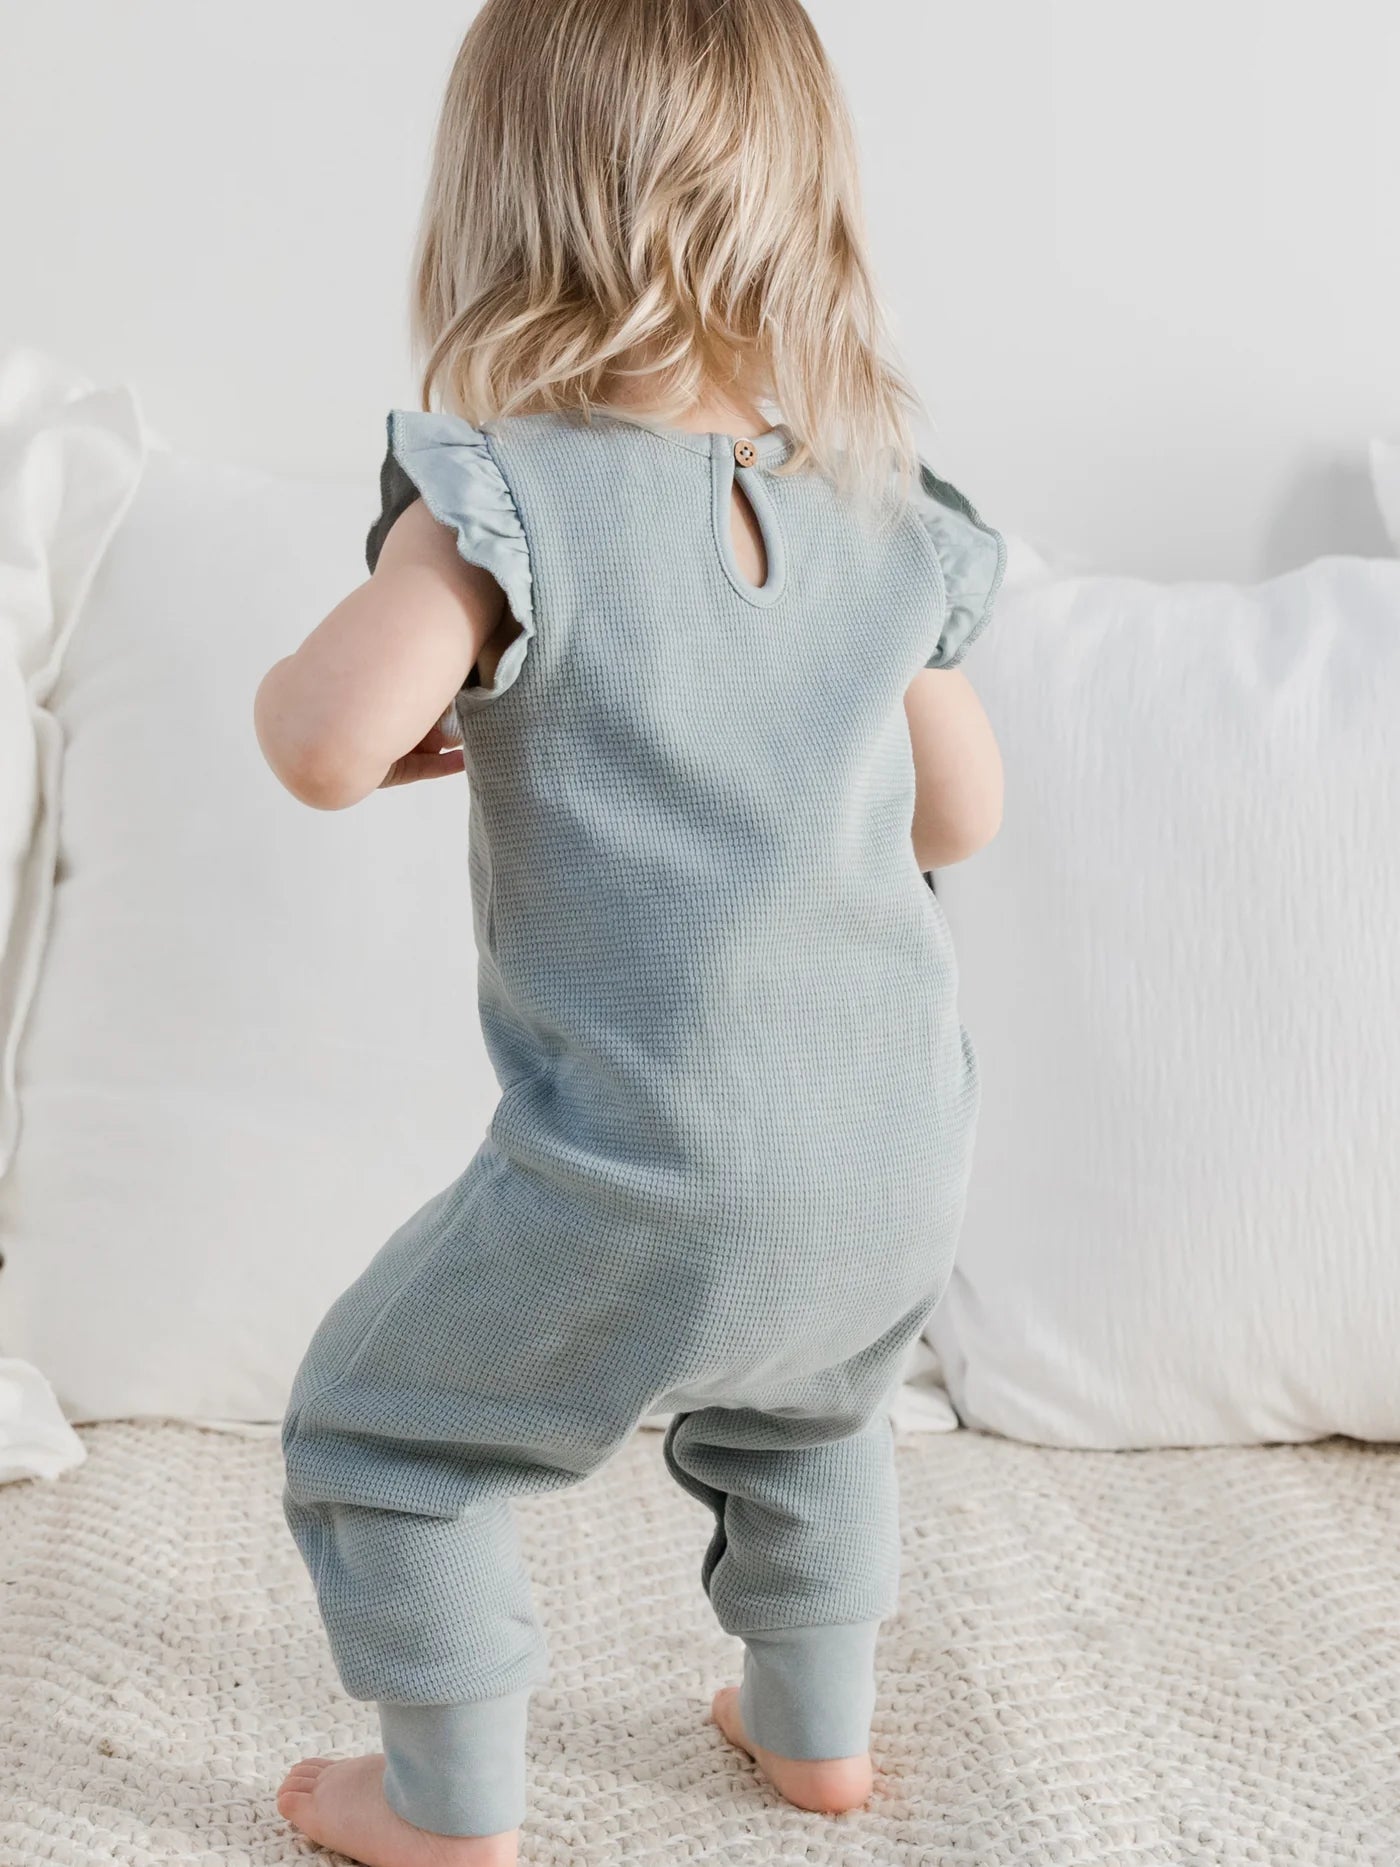 Our Maci Flutter Tank Romper is made from 100% organic waffled cotton, with eco-friendly coconut buttons and nickel-free snaps. The adorable flutter sleeve and neckl